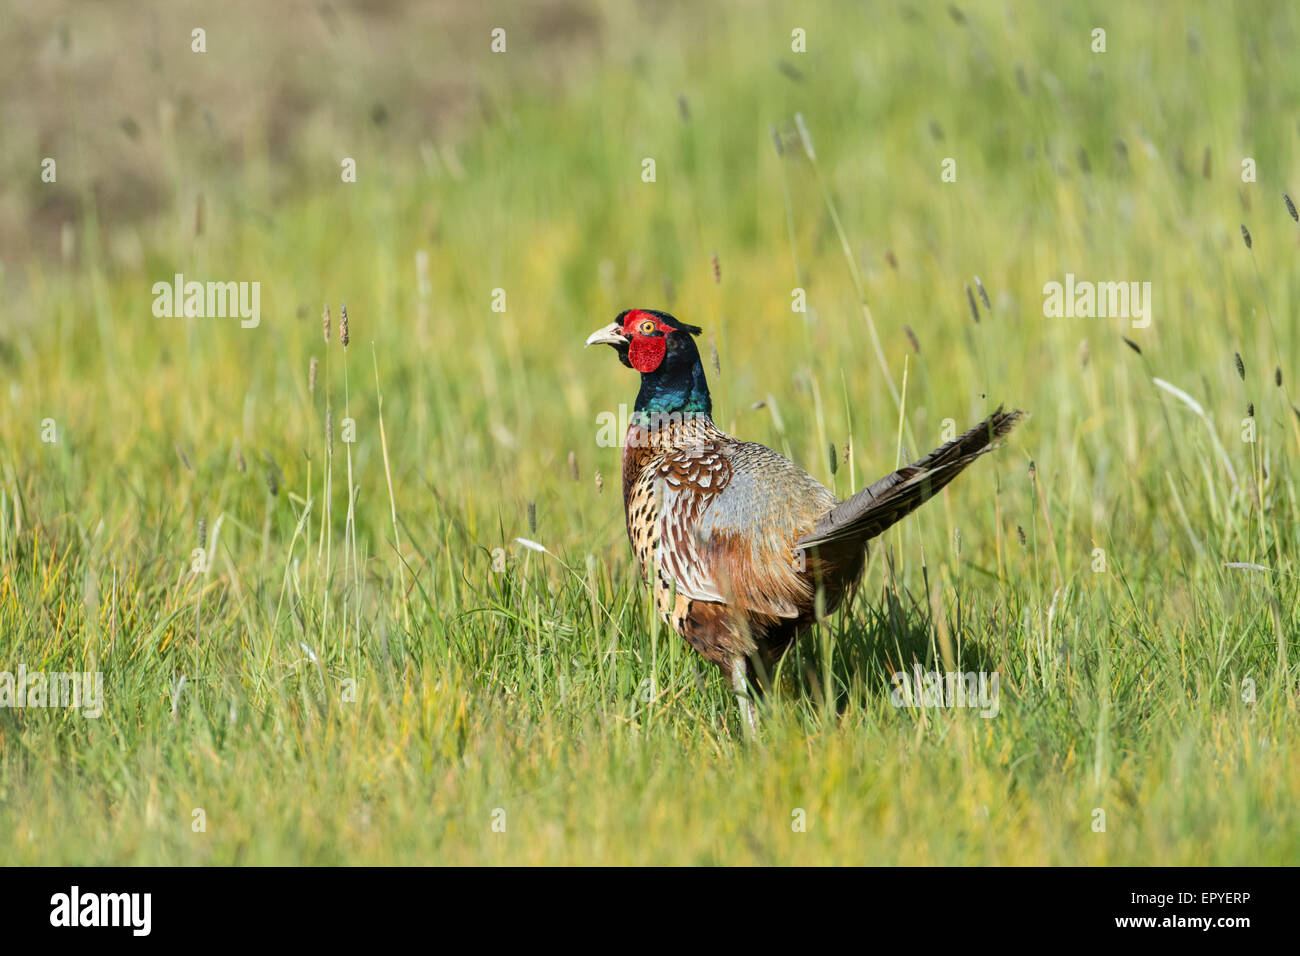 Pheasant (Phasianus colchicus). An adult male without a white neck-ring, showing characteristics of the colchicus group. Stock Photo